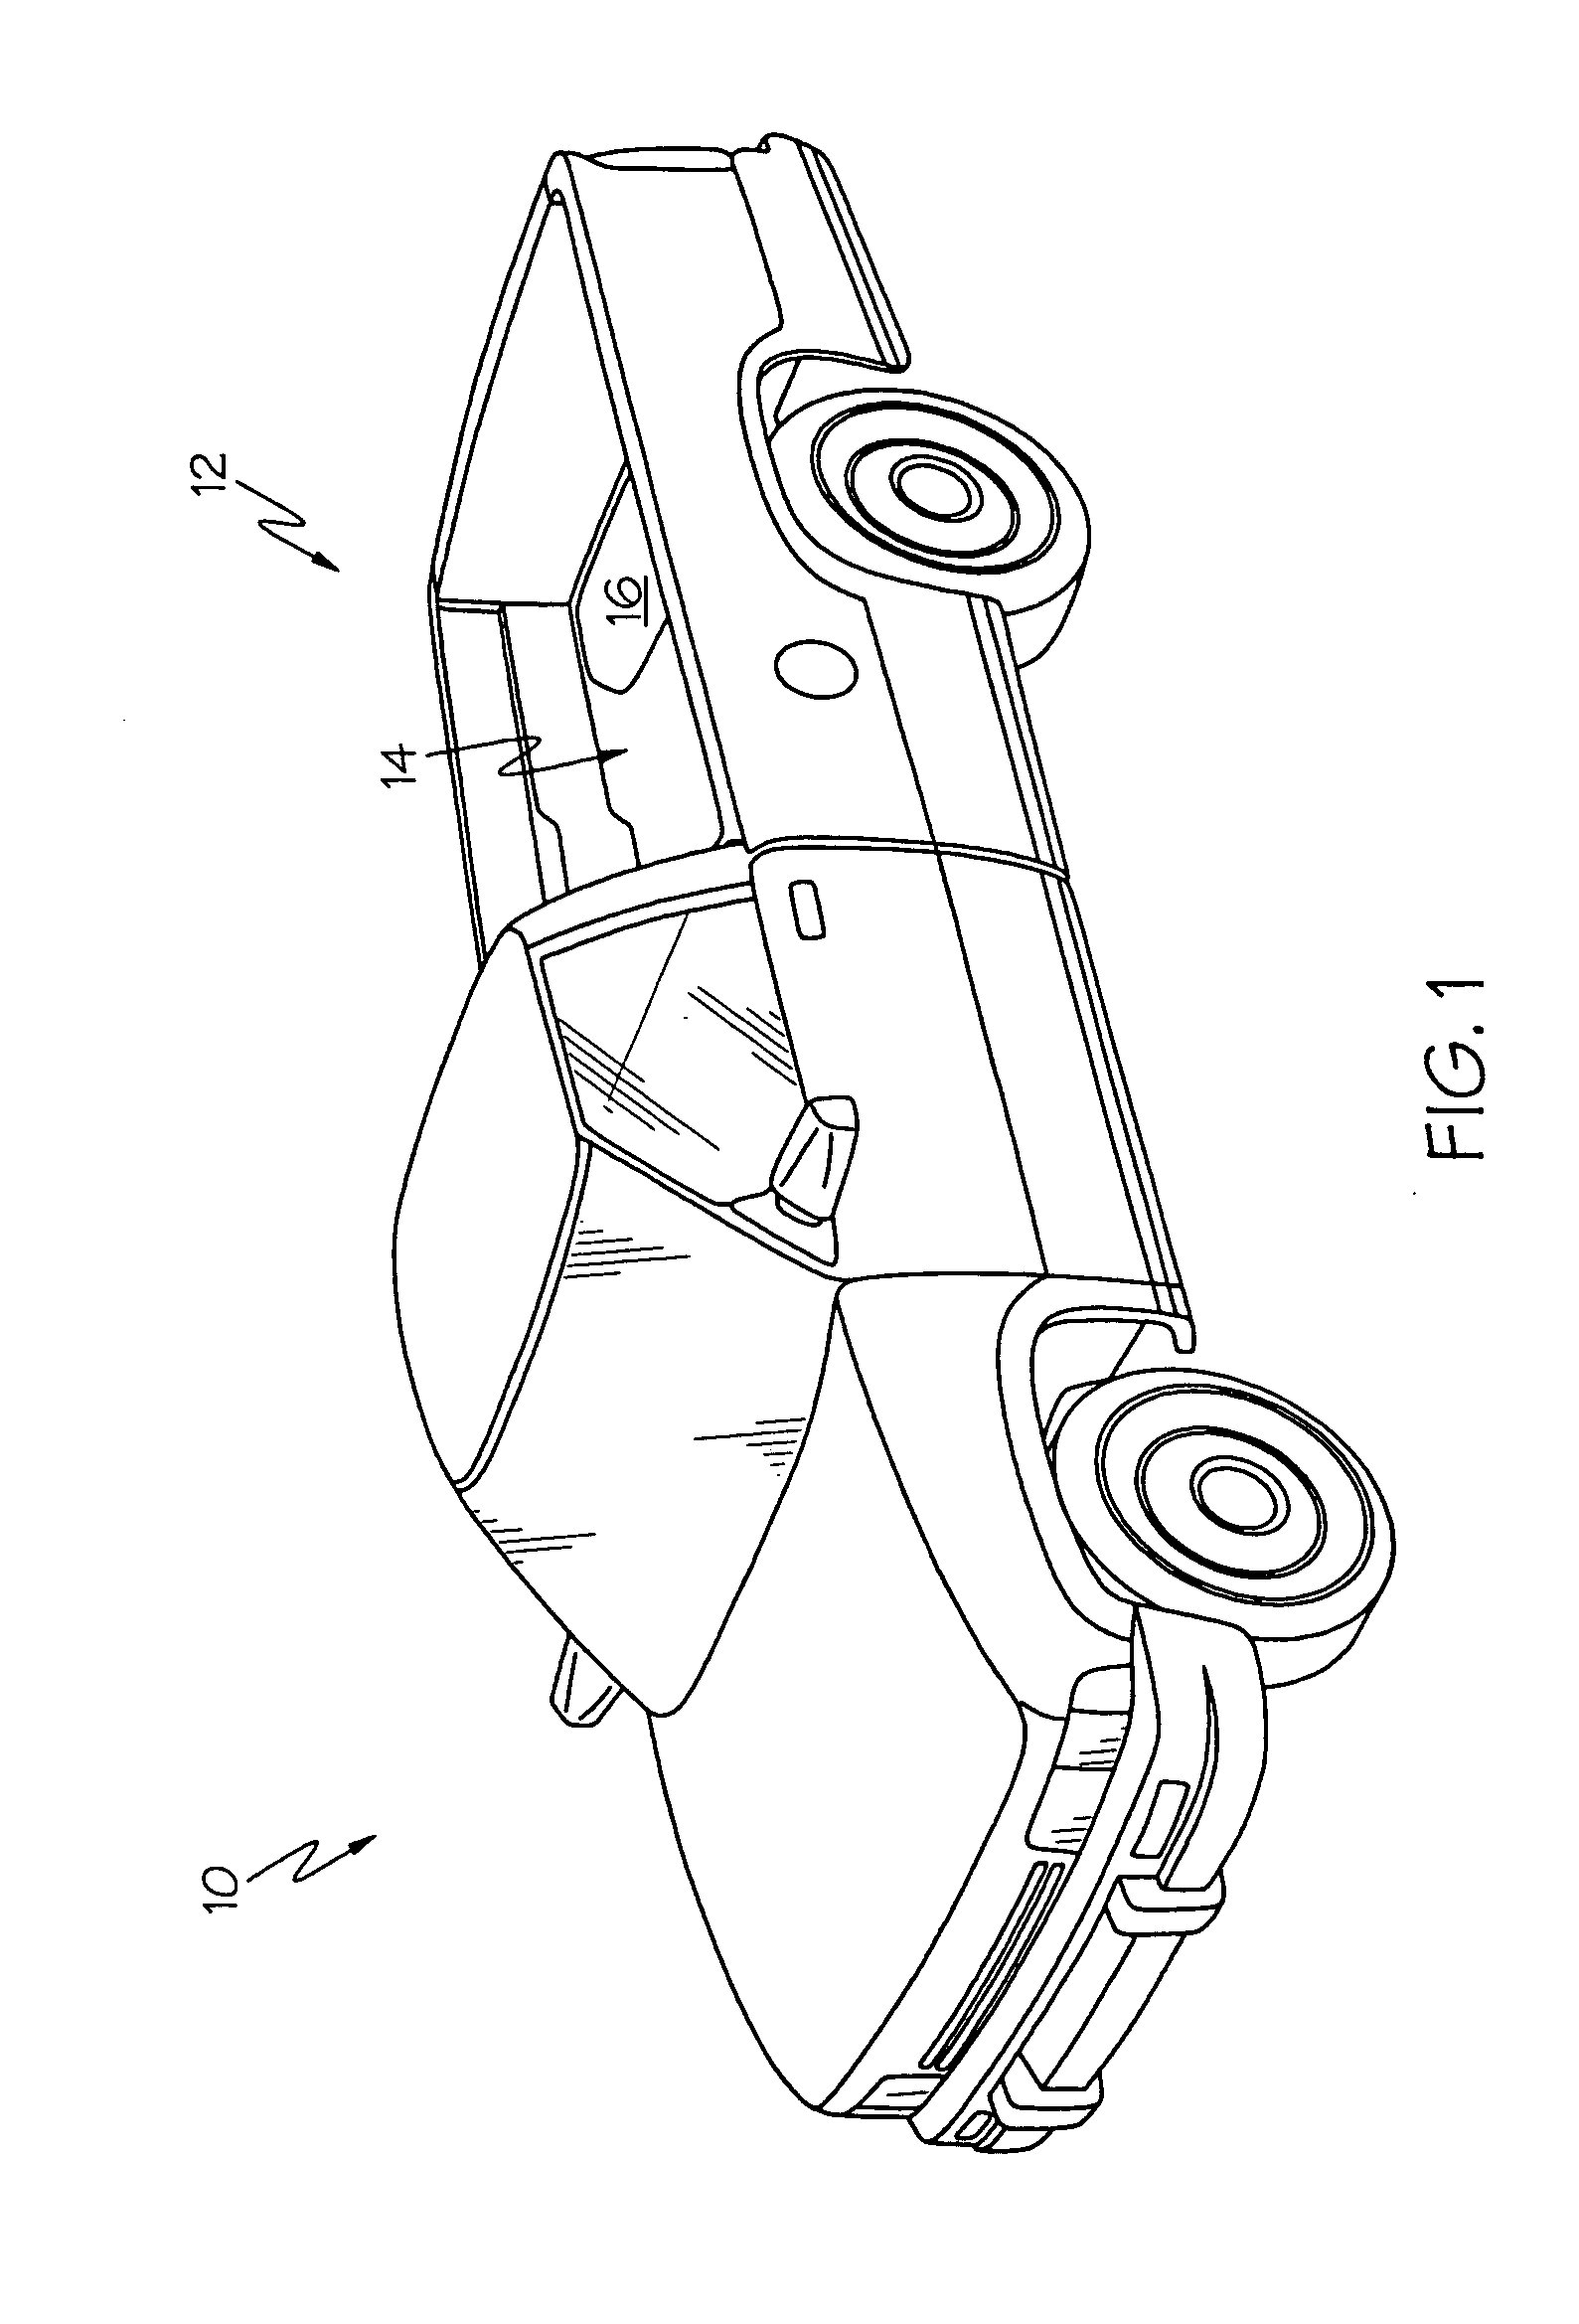 Support structure for a spare tire on a vehicle